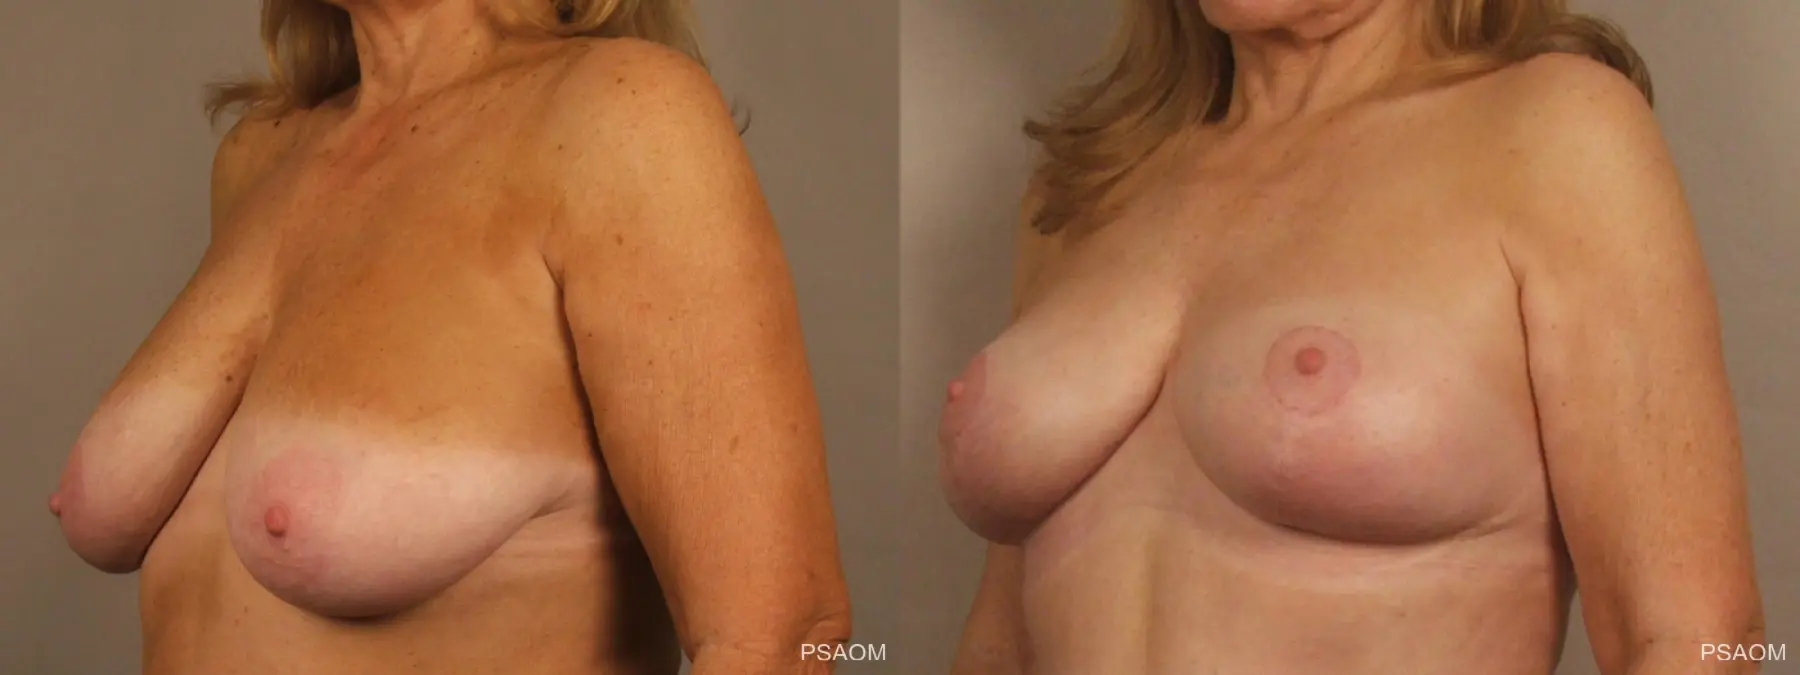 Breast Lift: Patient 1 - Before and After 3